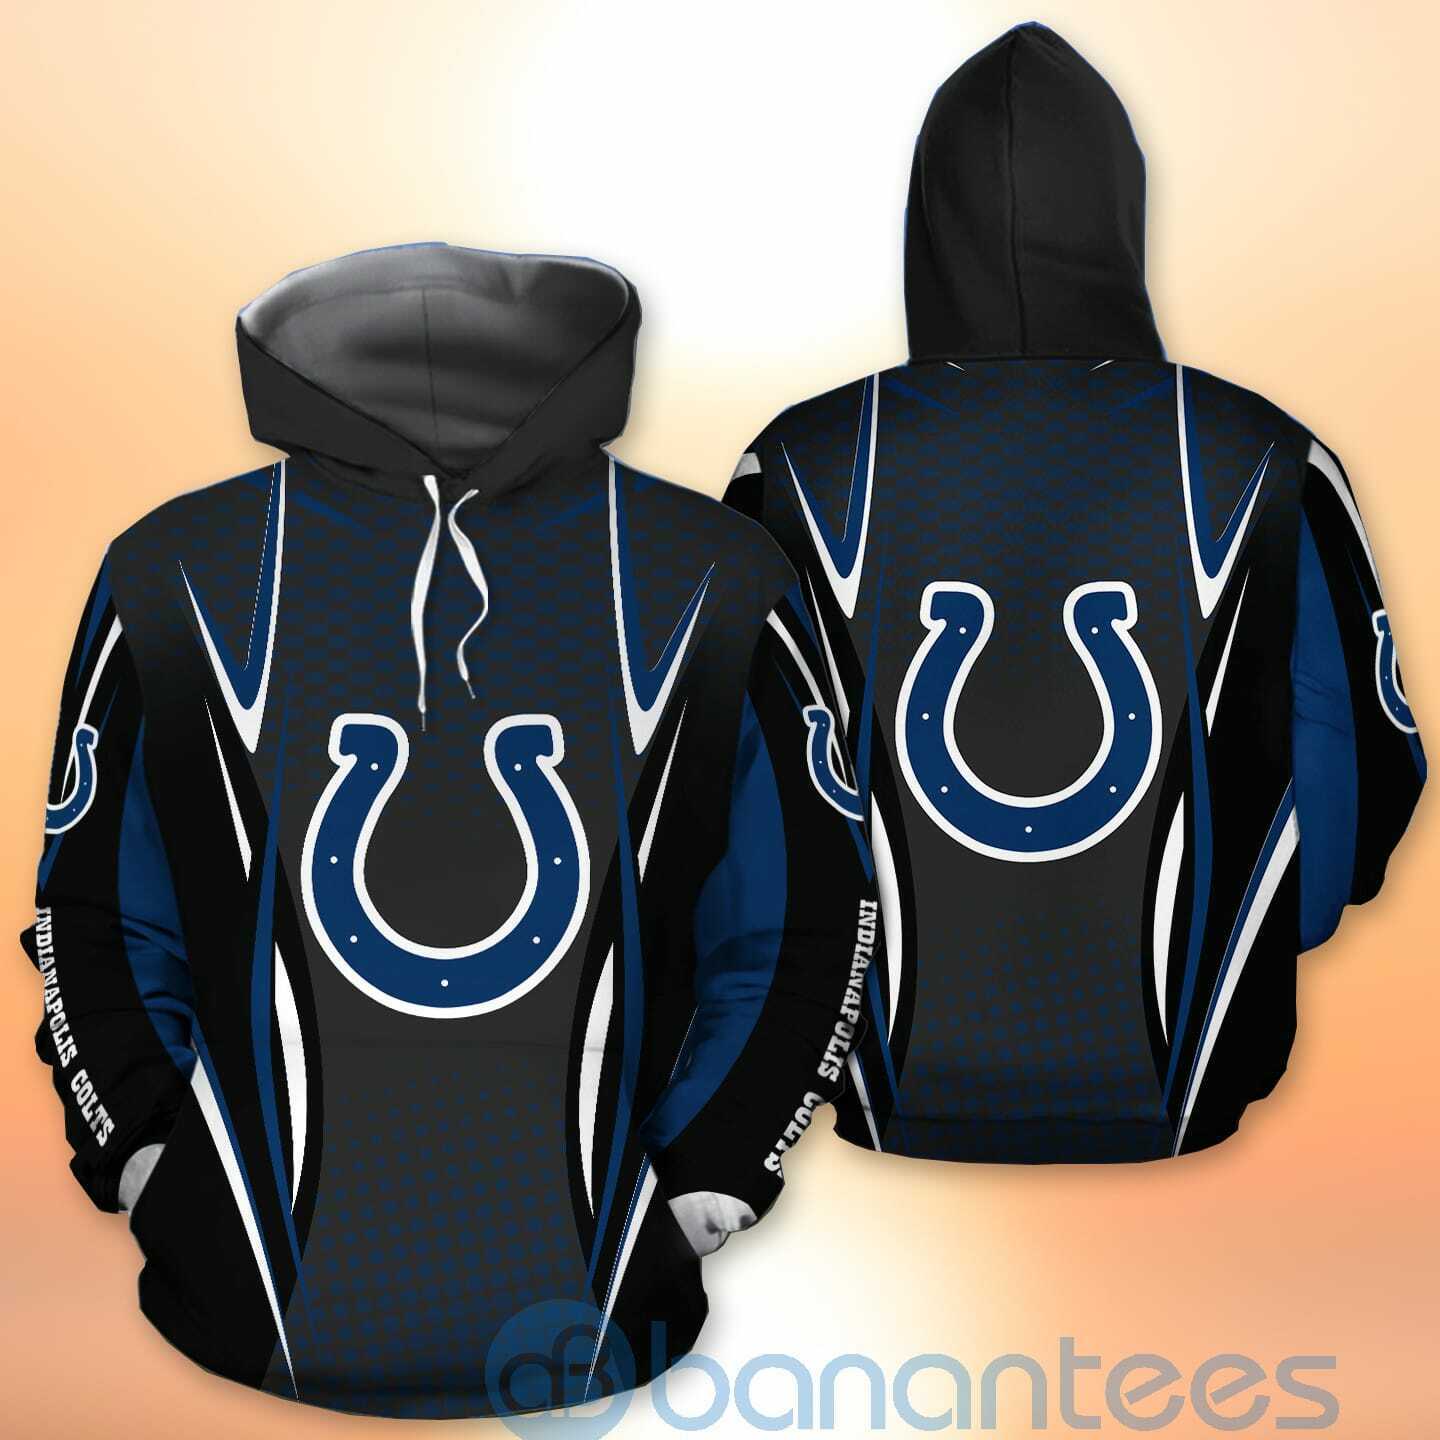 Indianapolis Colts NFL American Football Sporty Design 3D All Over Printed Shirt